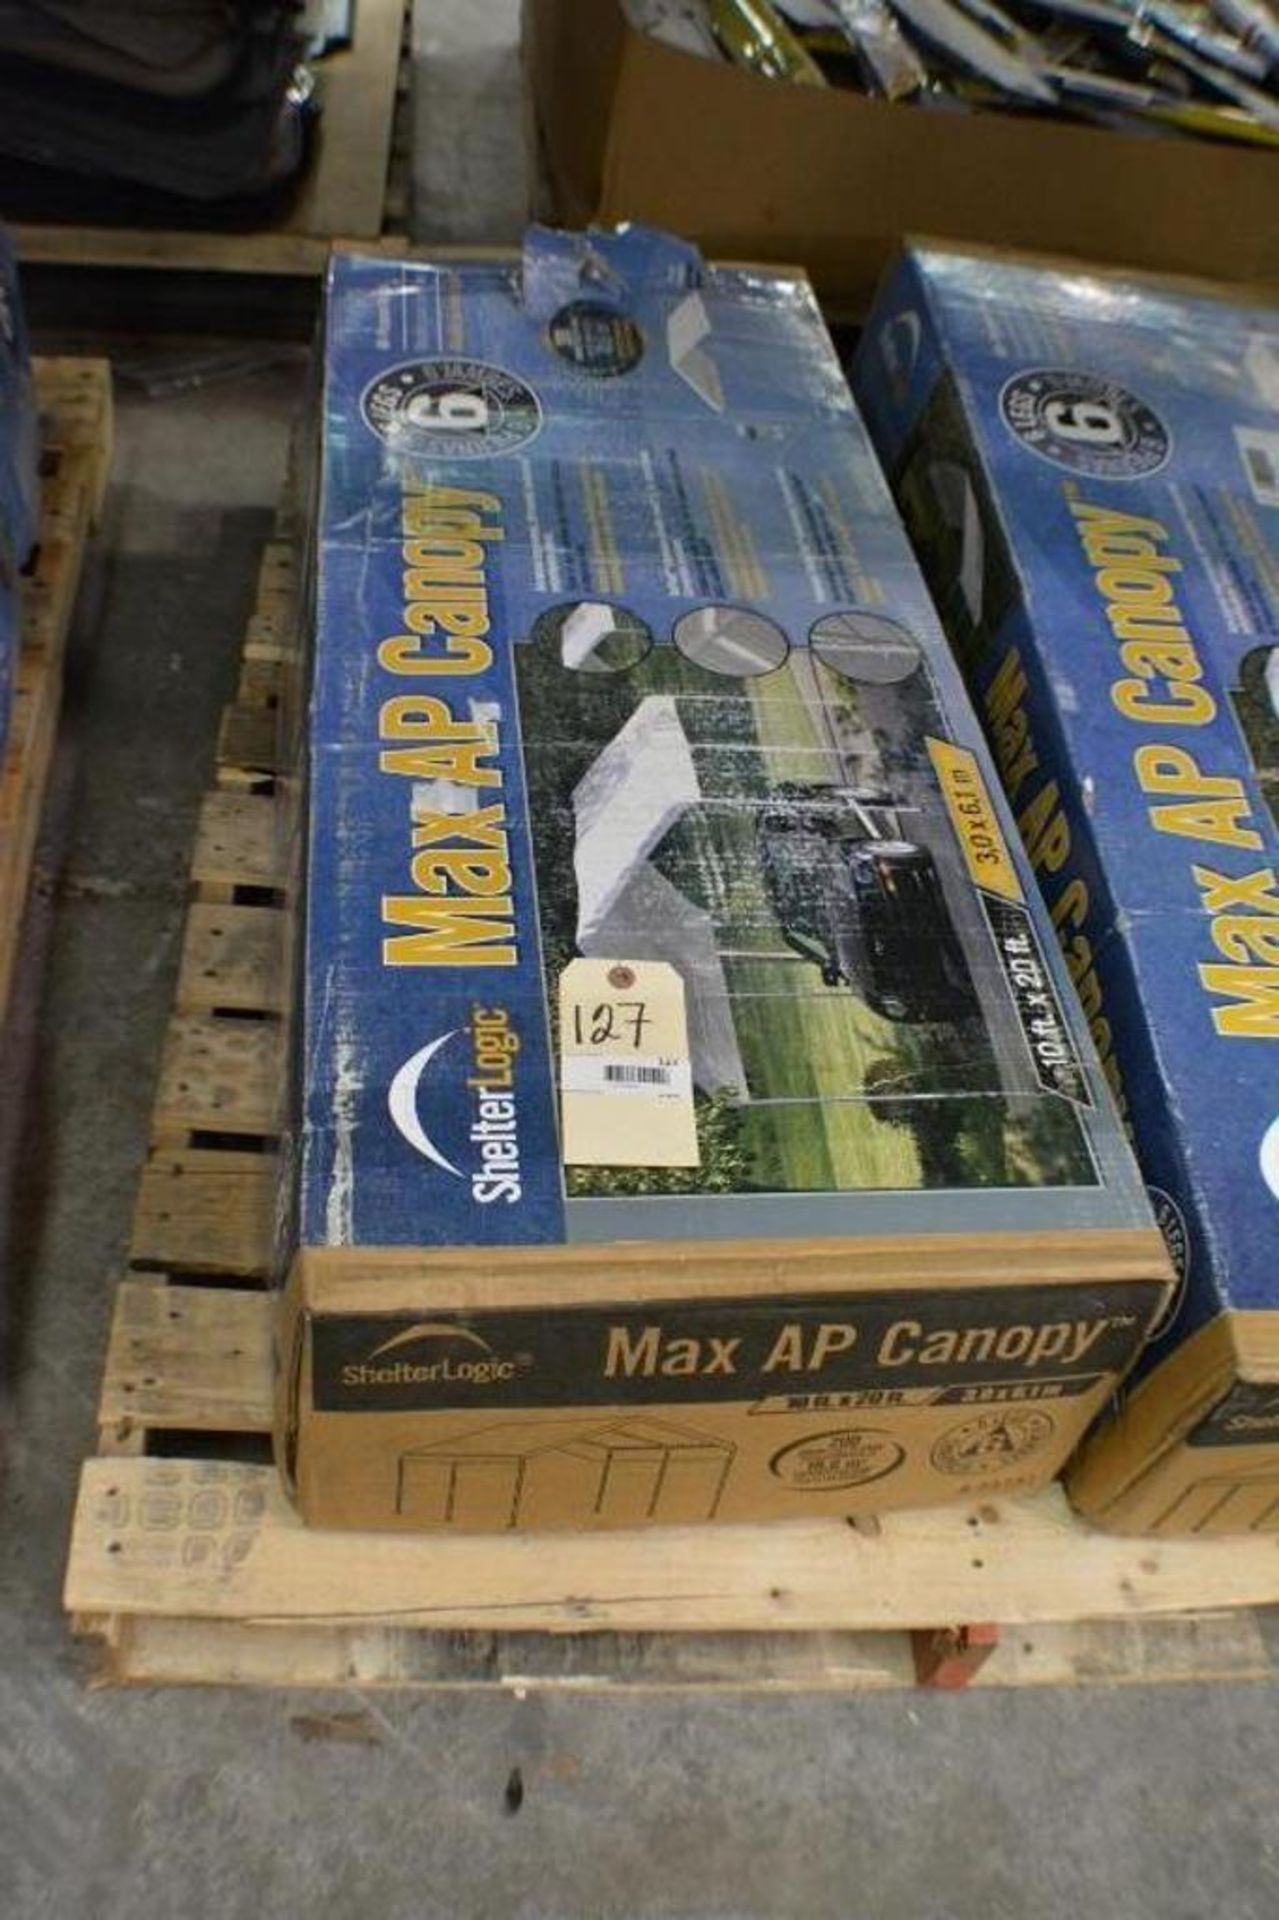 Max AP Canopy. Size 10ft x 20ft. Contents of Pallet - Image 2 of 3